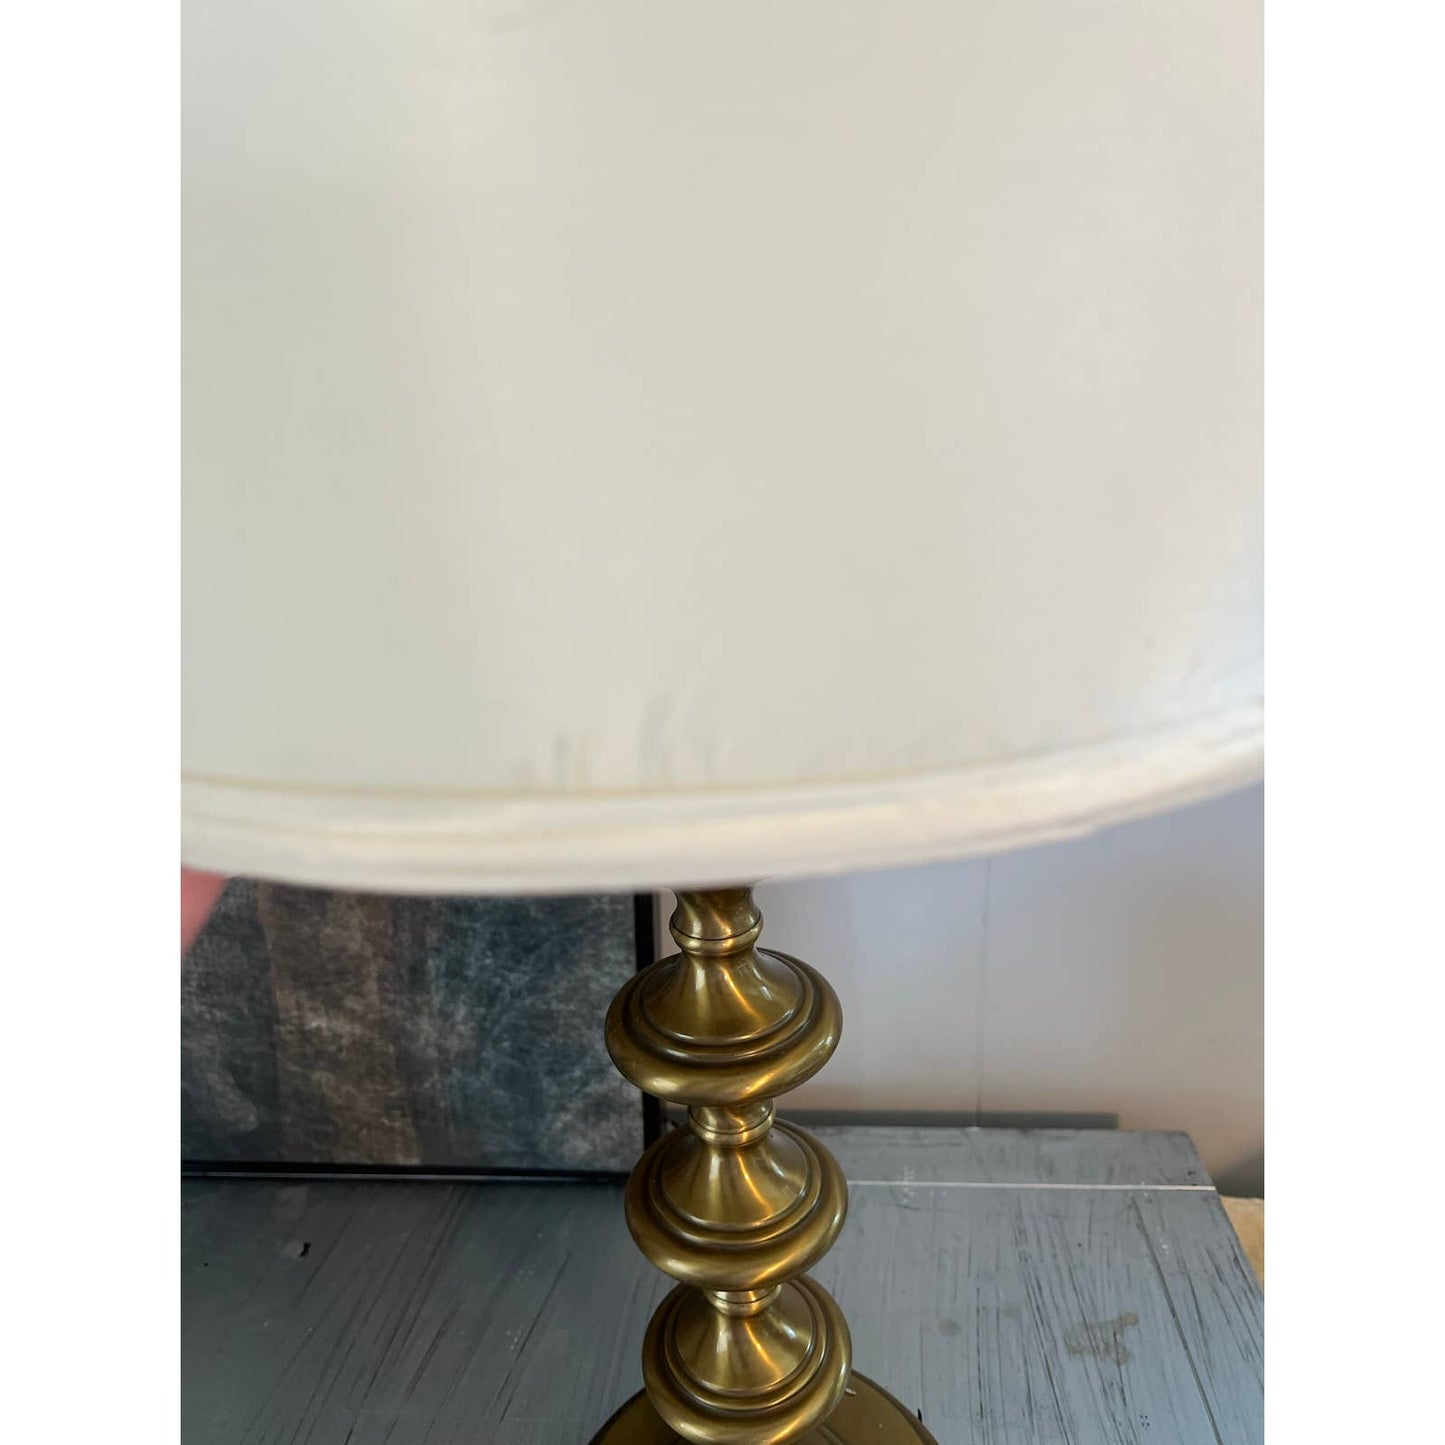 2 ANTIQUE BRASS TABLE LAMPS WITH FABRIC SHADES 32" TALL